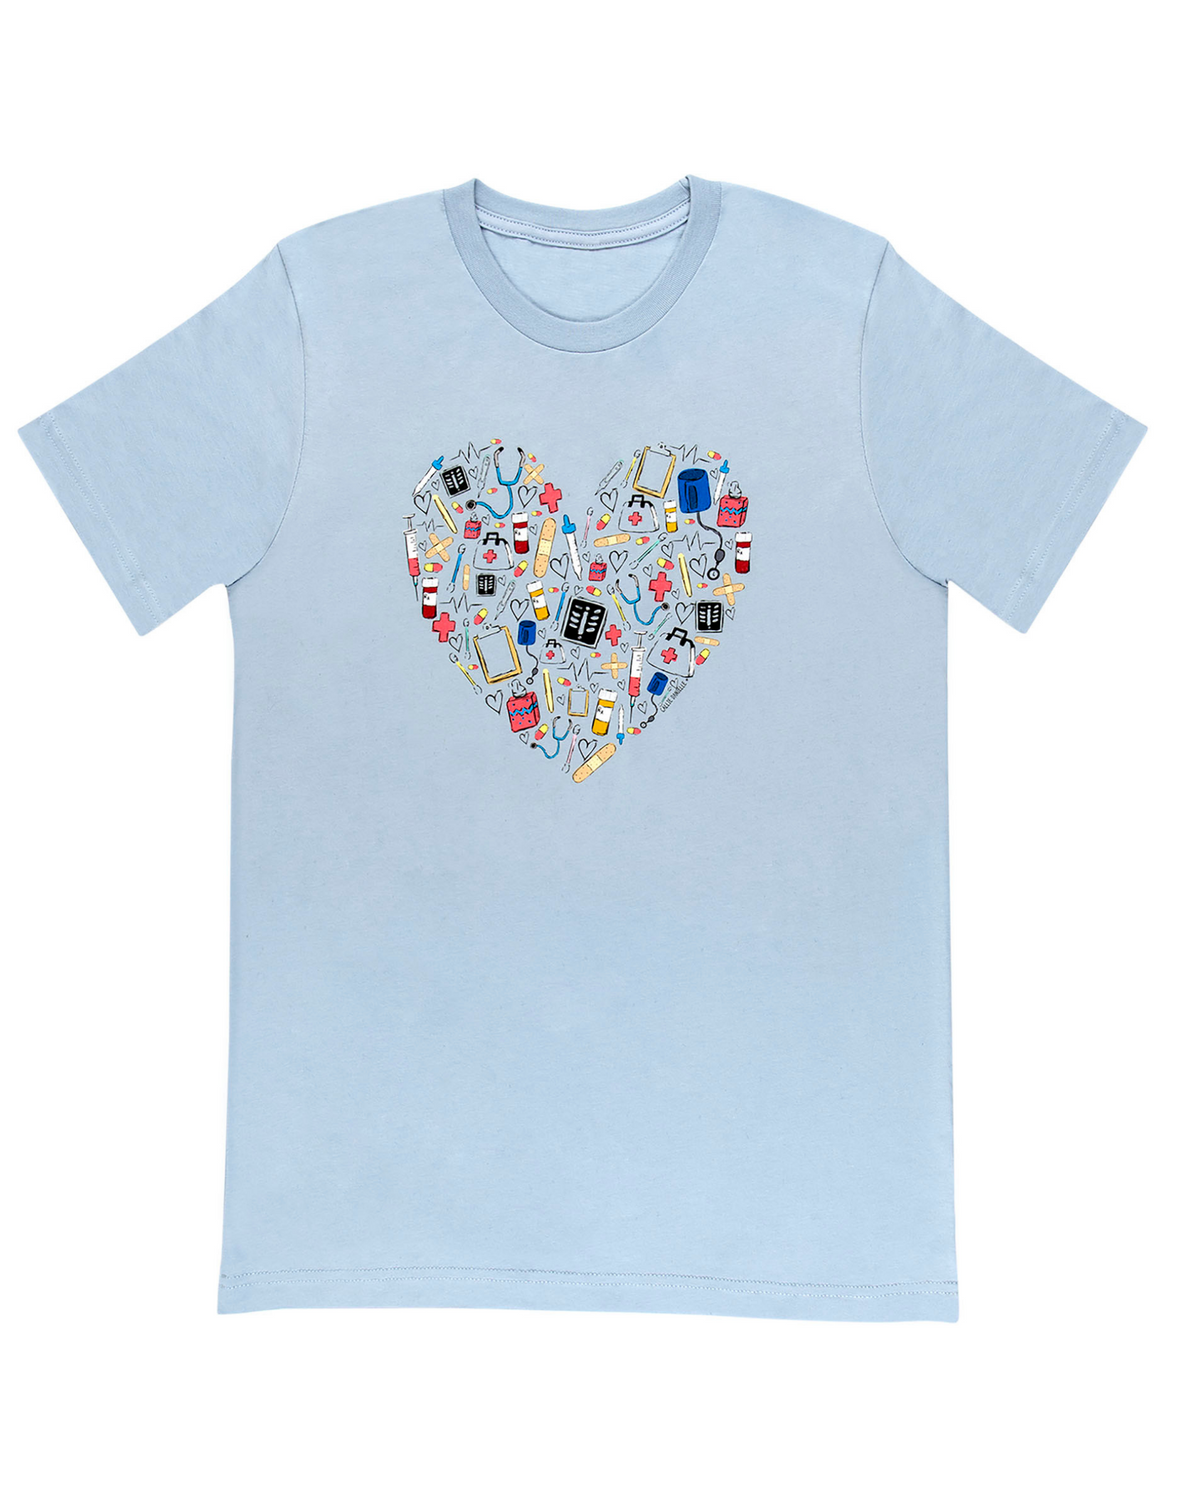 Love For Healthcare Workers Tee - Light Blue image